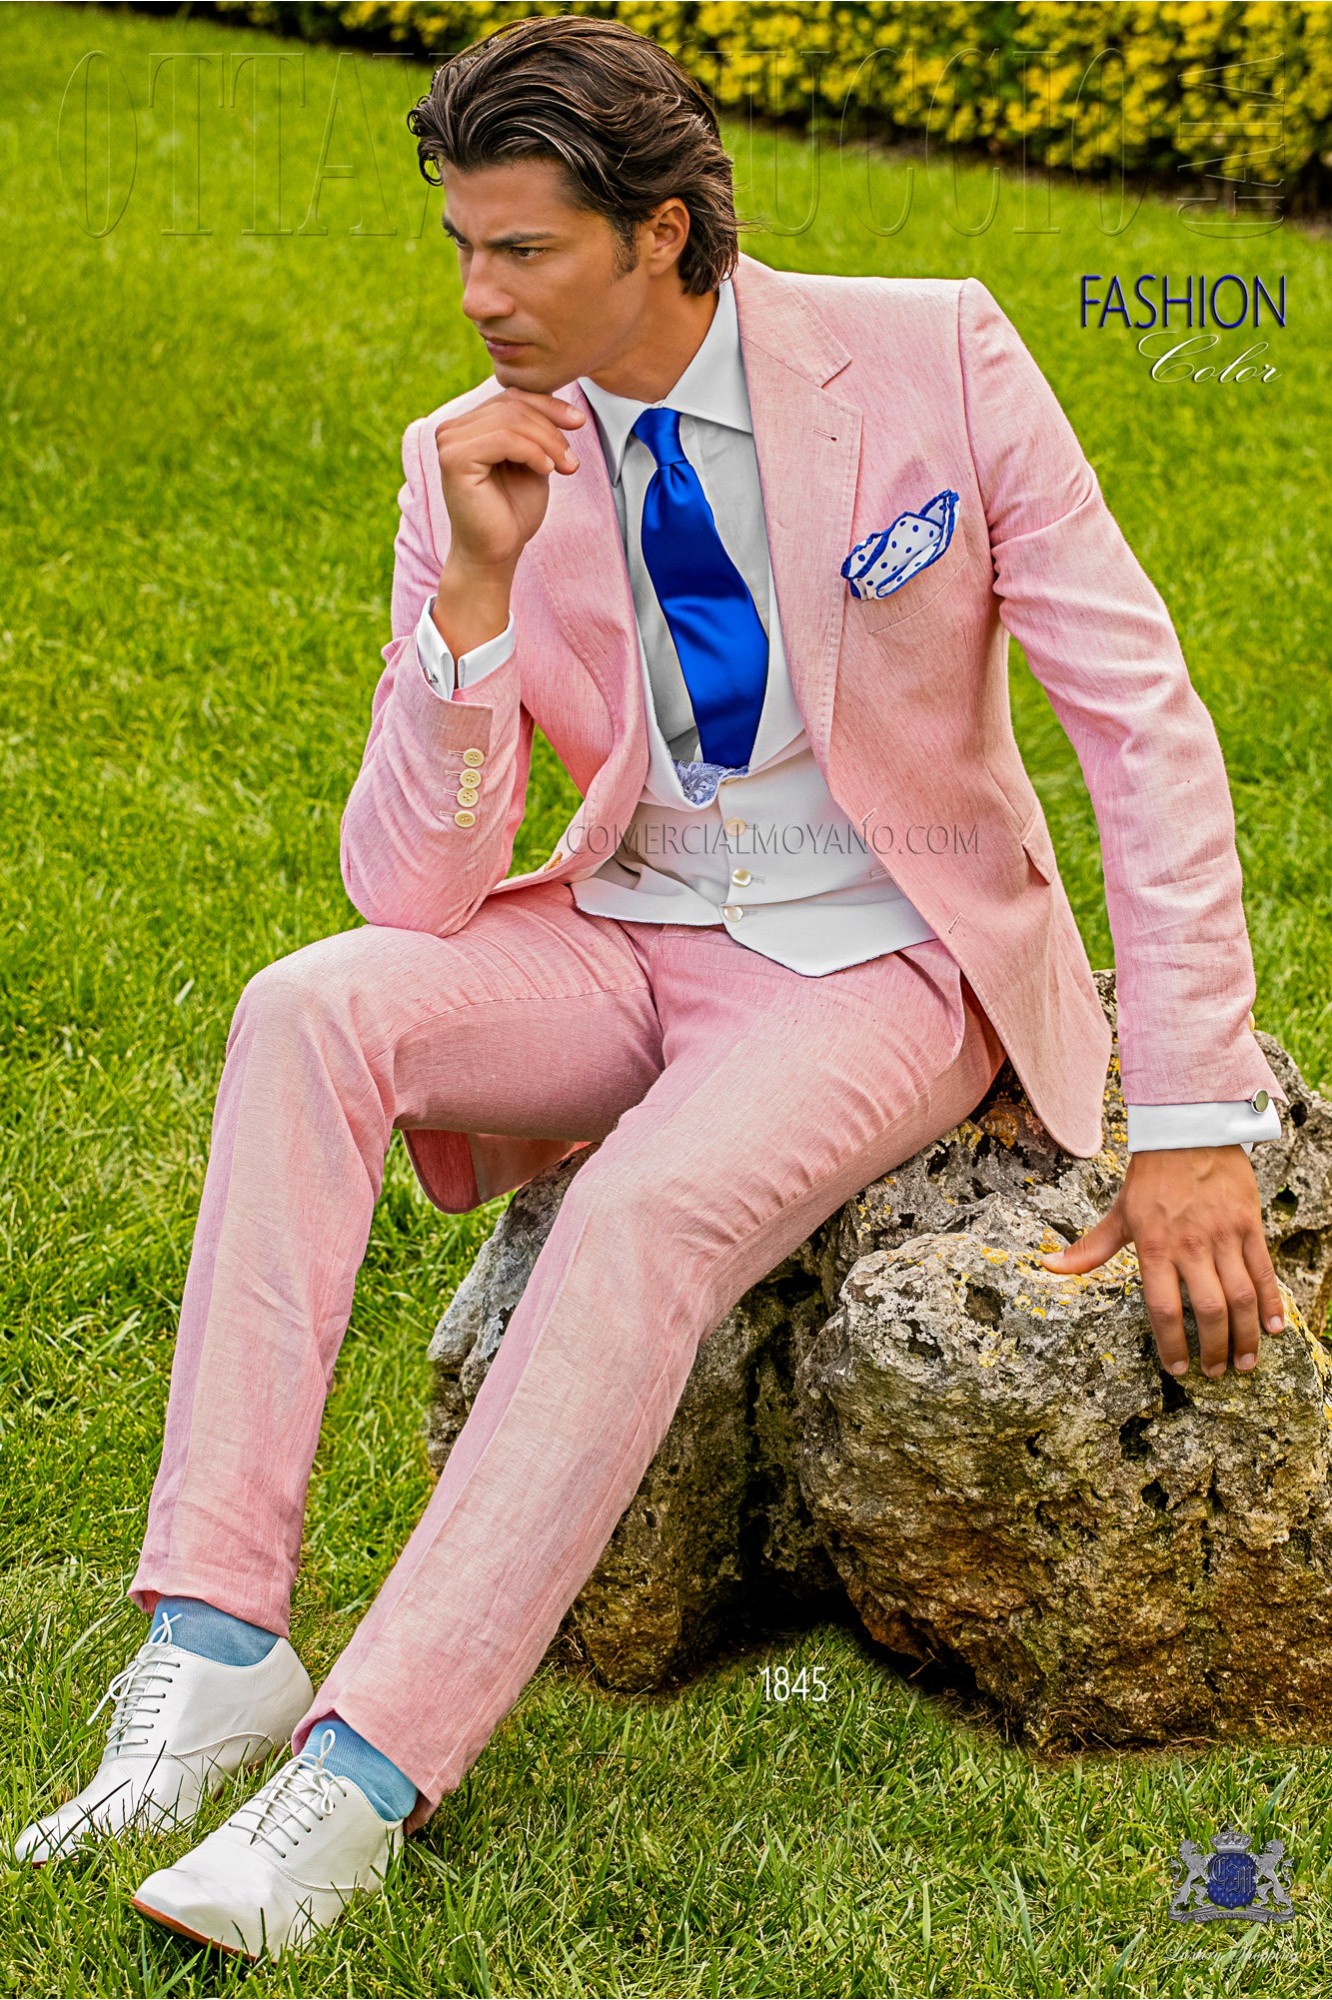 Stitched bespoke pink metalized linen suit model 1845 Mario Moyano